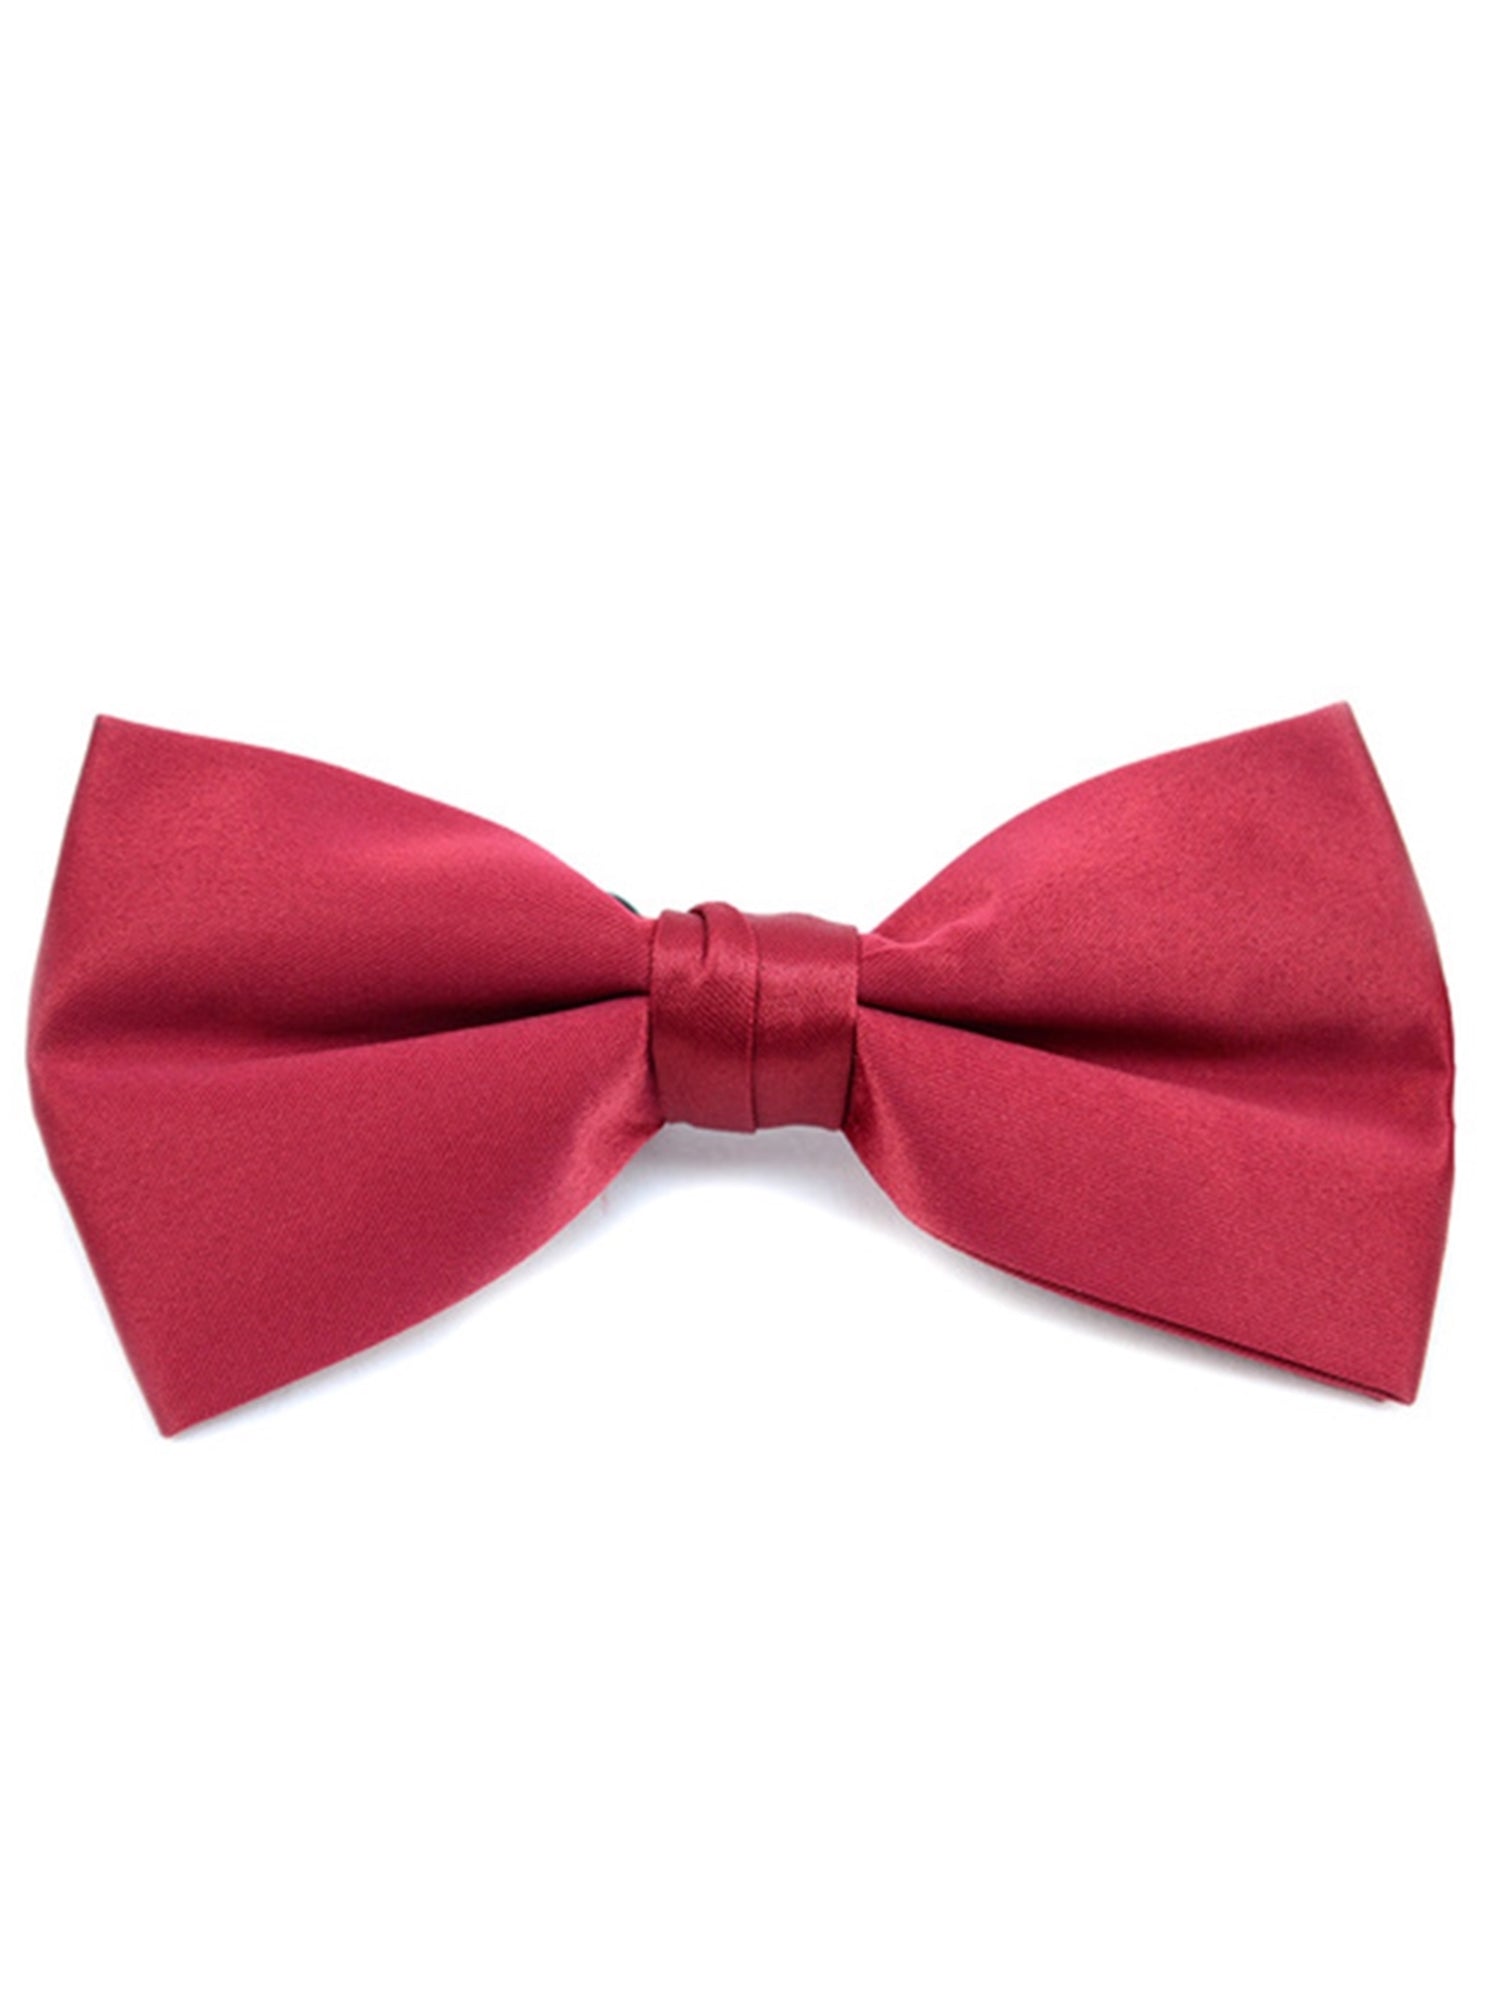 Men's Pre-tied Adjustable Length Bow Tie - Formal Tuxedo Solid Color Men's Solid Color Bow Tie TheDapperTie Burgundy One Size 